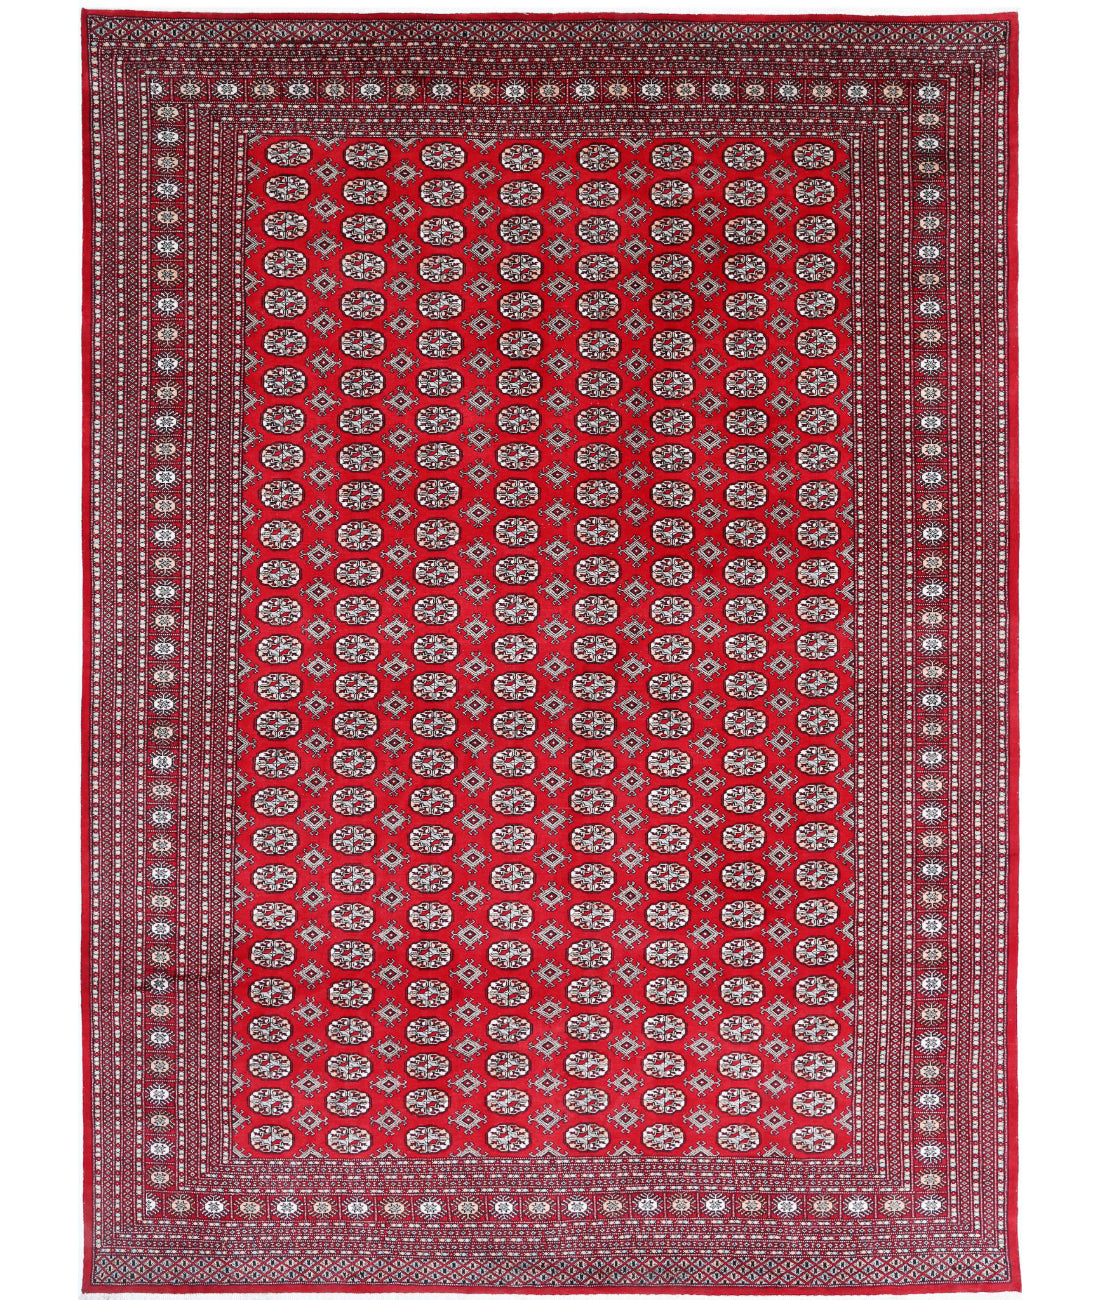 Hand Knotted Tribal Bokhara Wool Rug - 10&#39;2&#39;&#39; x 13&#39;11&#39;&#39; 10&#39;2&#39;&#39; x 13&#39;11&#39;&#39; (305 X 418) / Red / Black